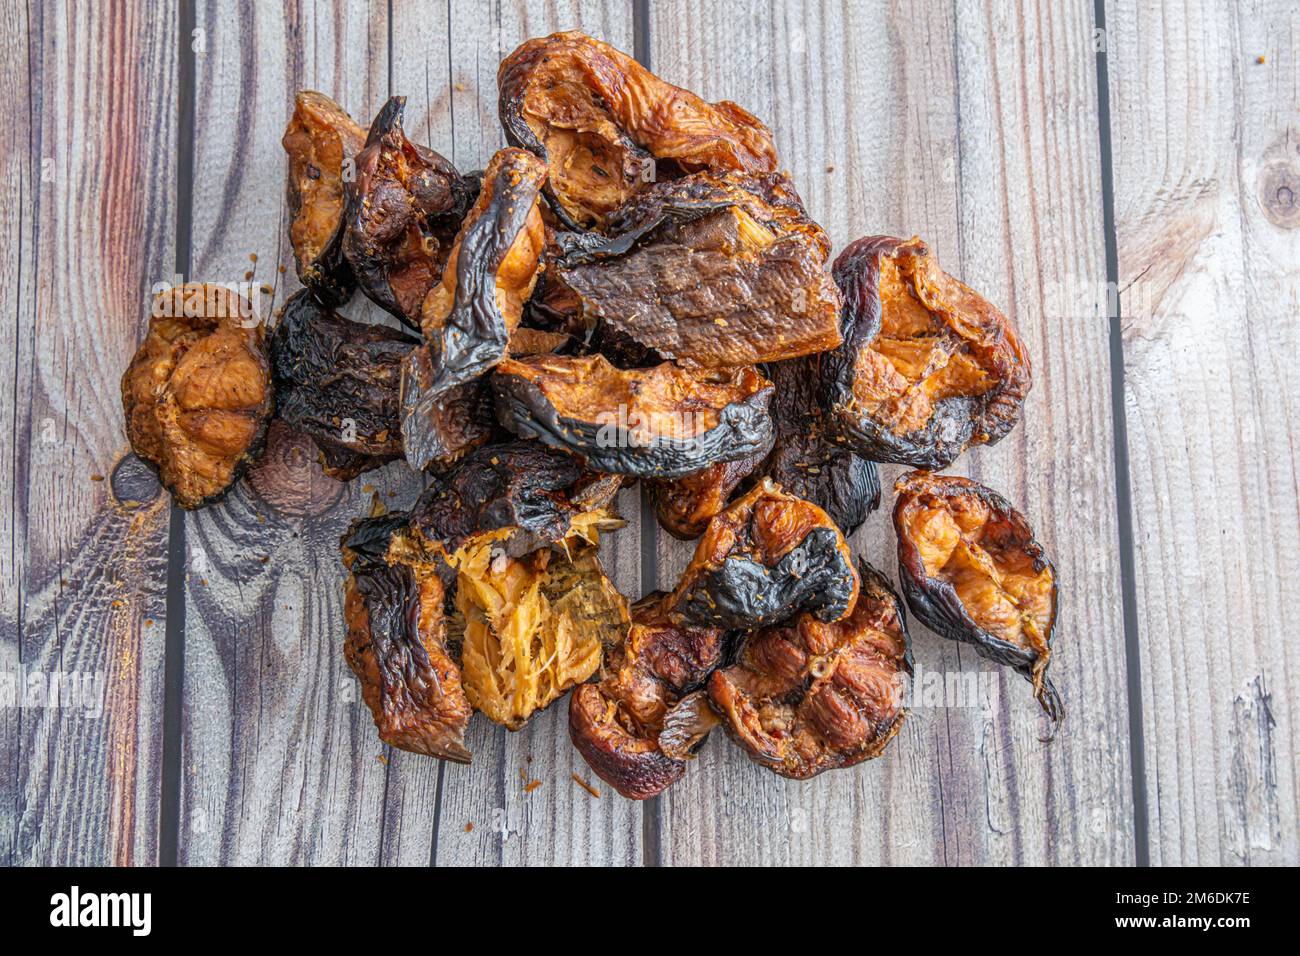 Dried Grilled Nigerian Fish used to prepare Soups and Sauces Stock Photo